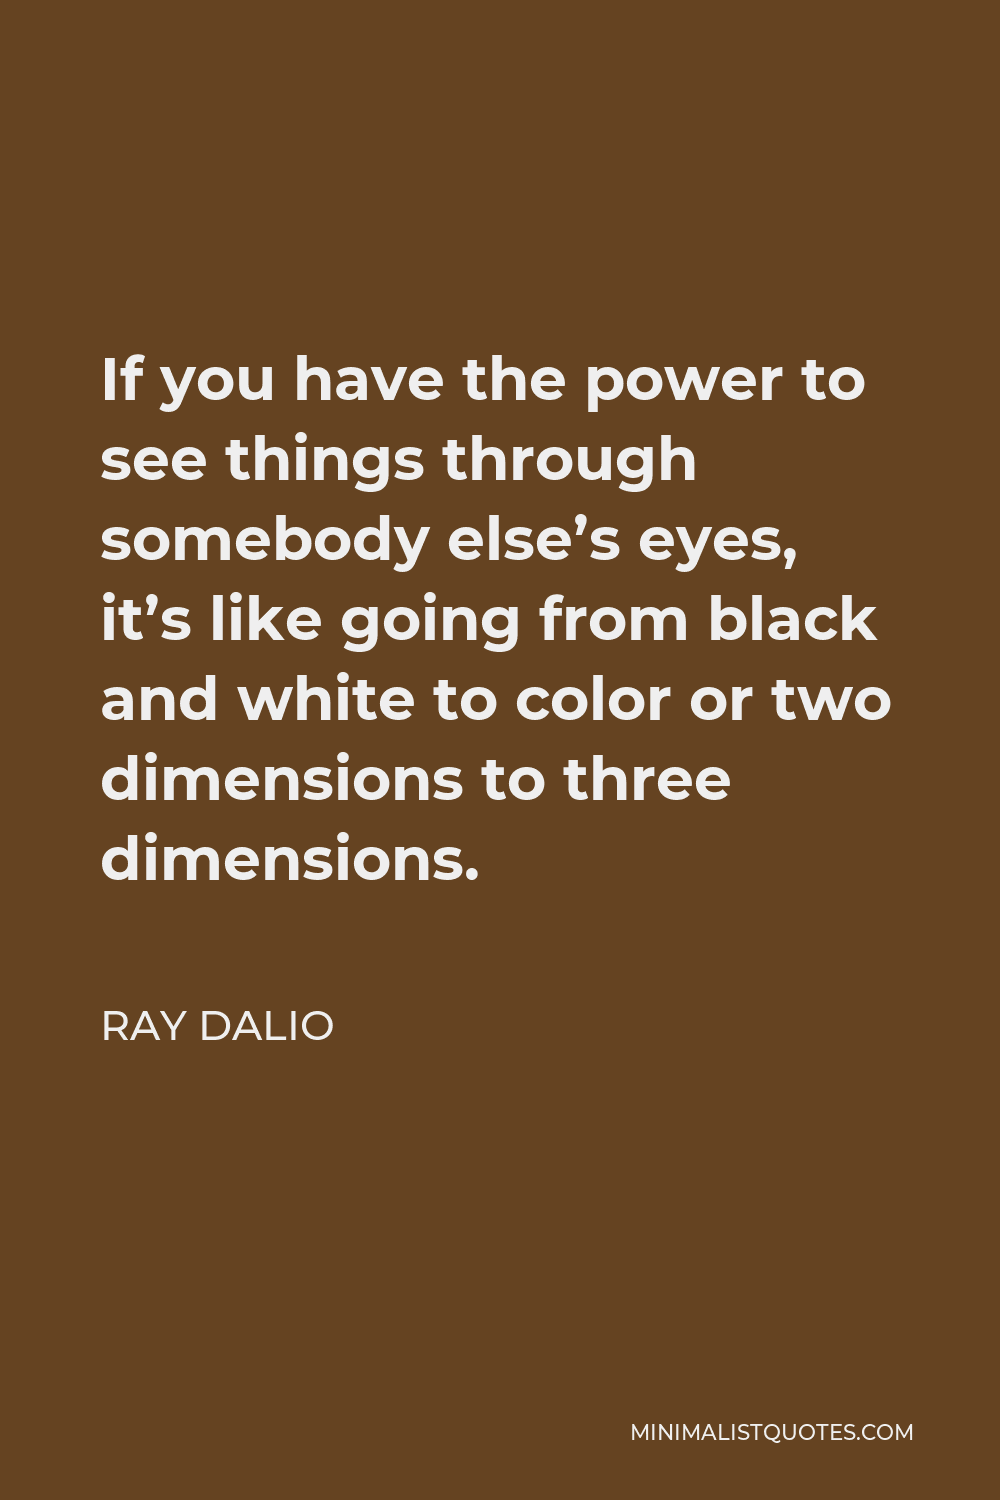 Ray Dalio Quote - If you have the power to see things through somebody else’s eyes, it’s like going from black and white to color or two dimensions to three dimensions.